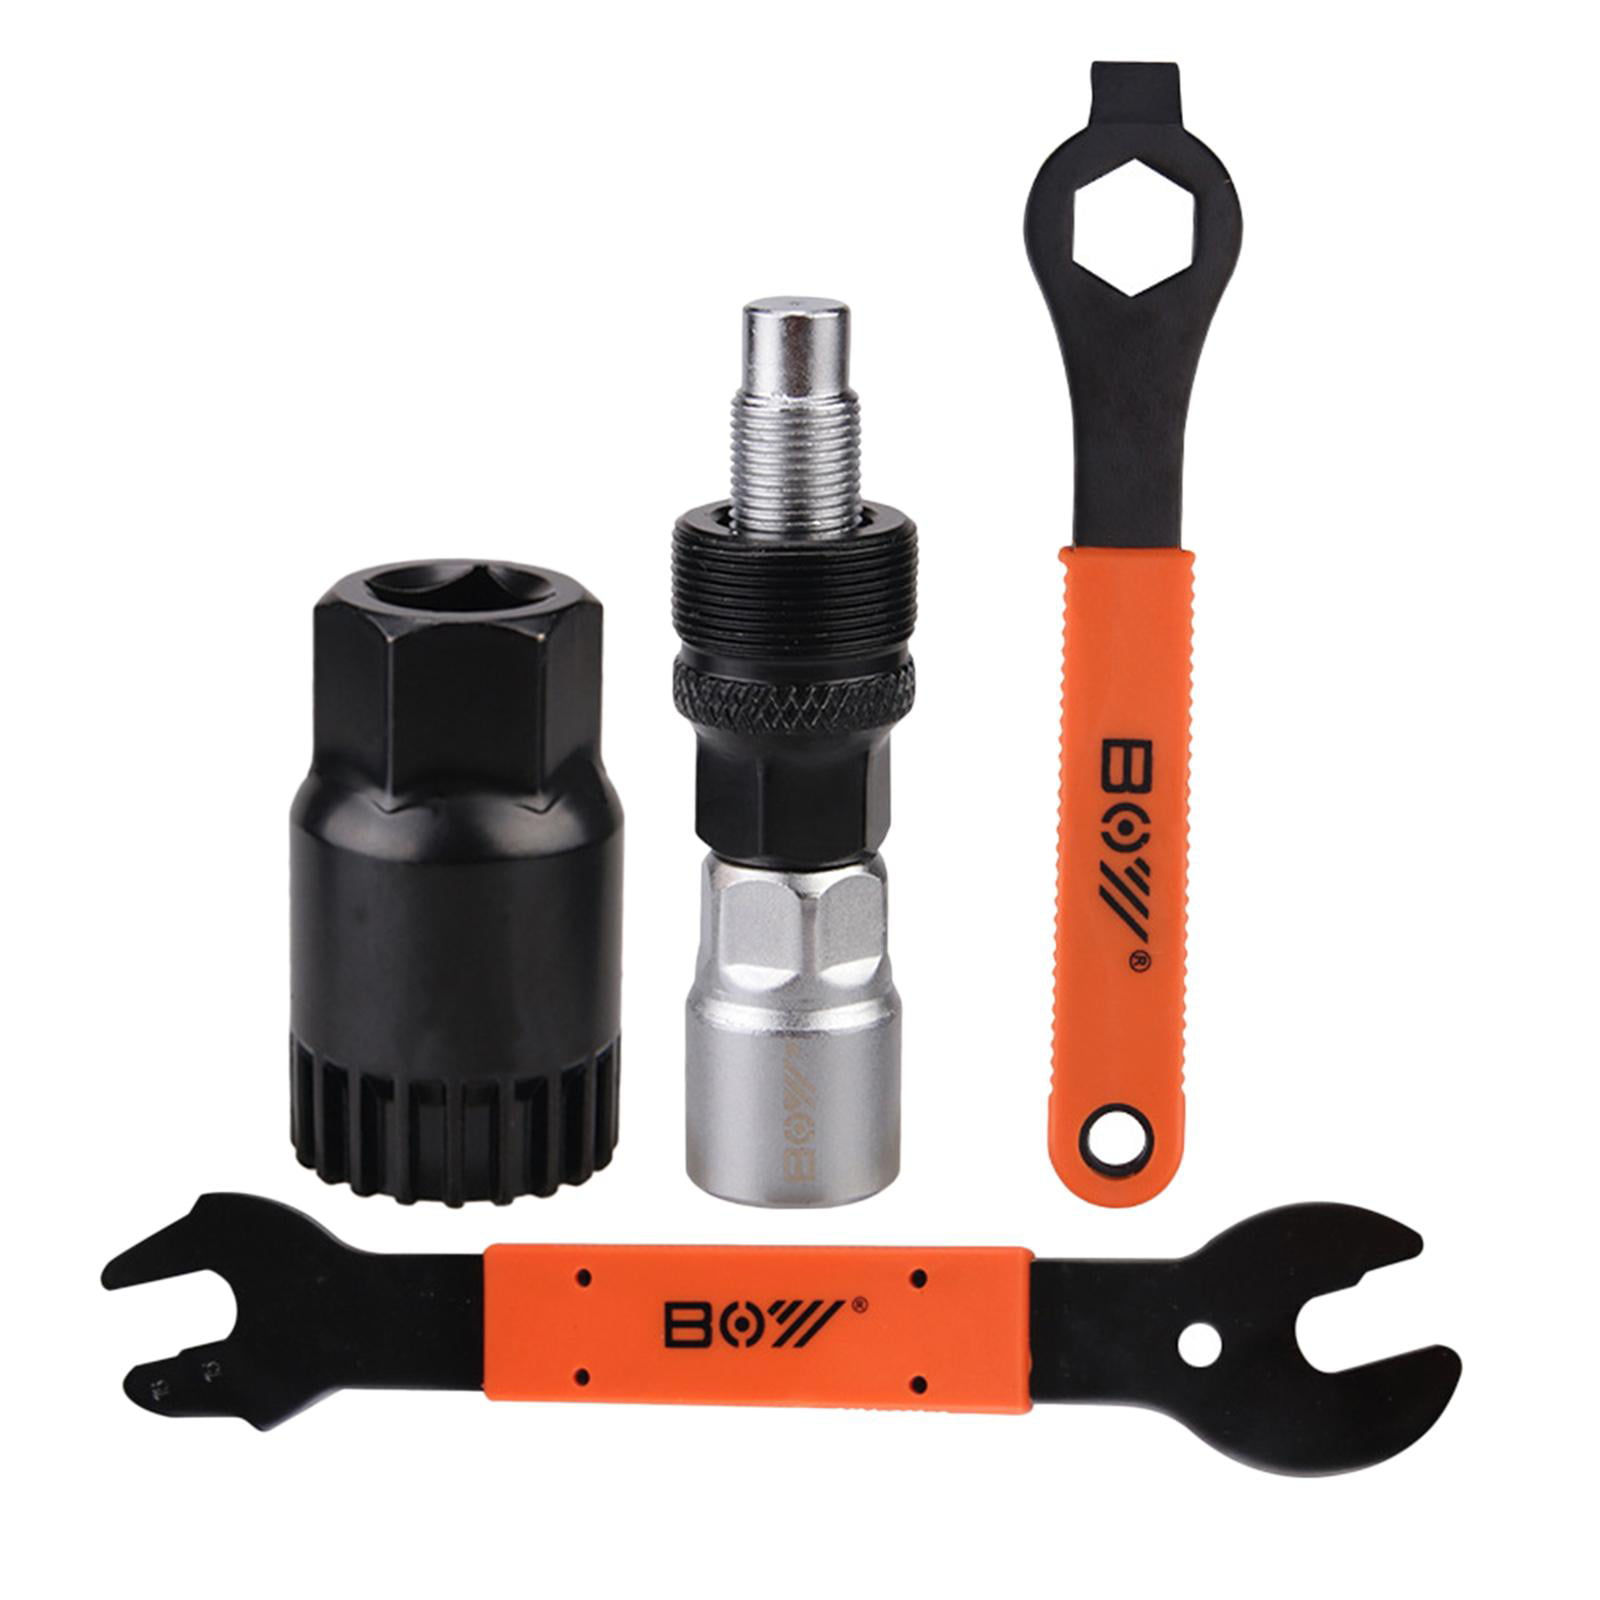 Repairing Tool Crank Arm Puller Remover Wrench Tool Handle for Bicycle 